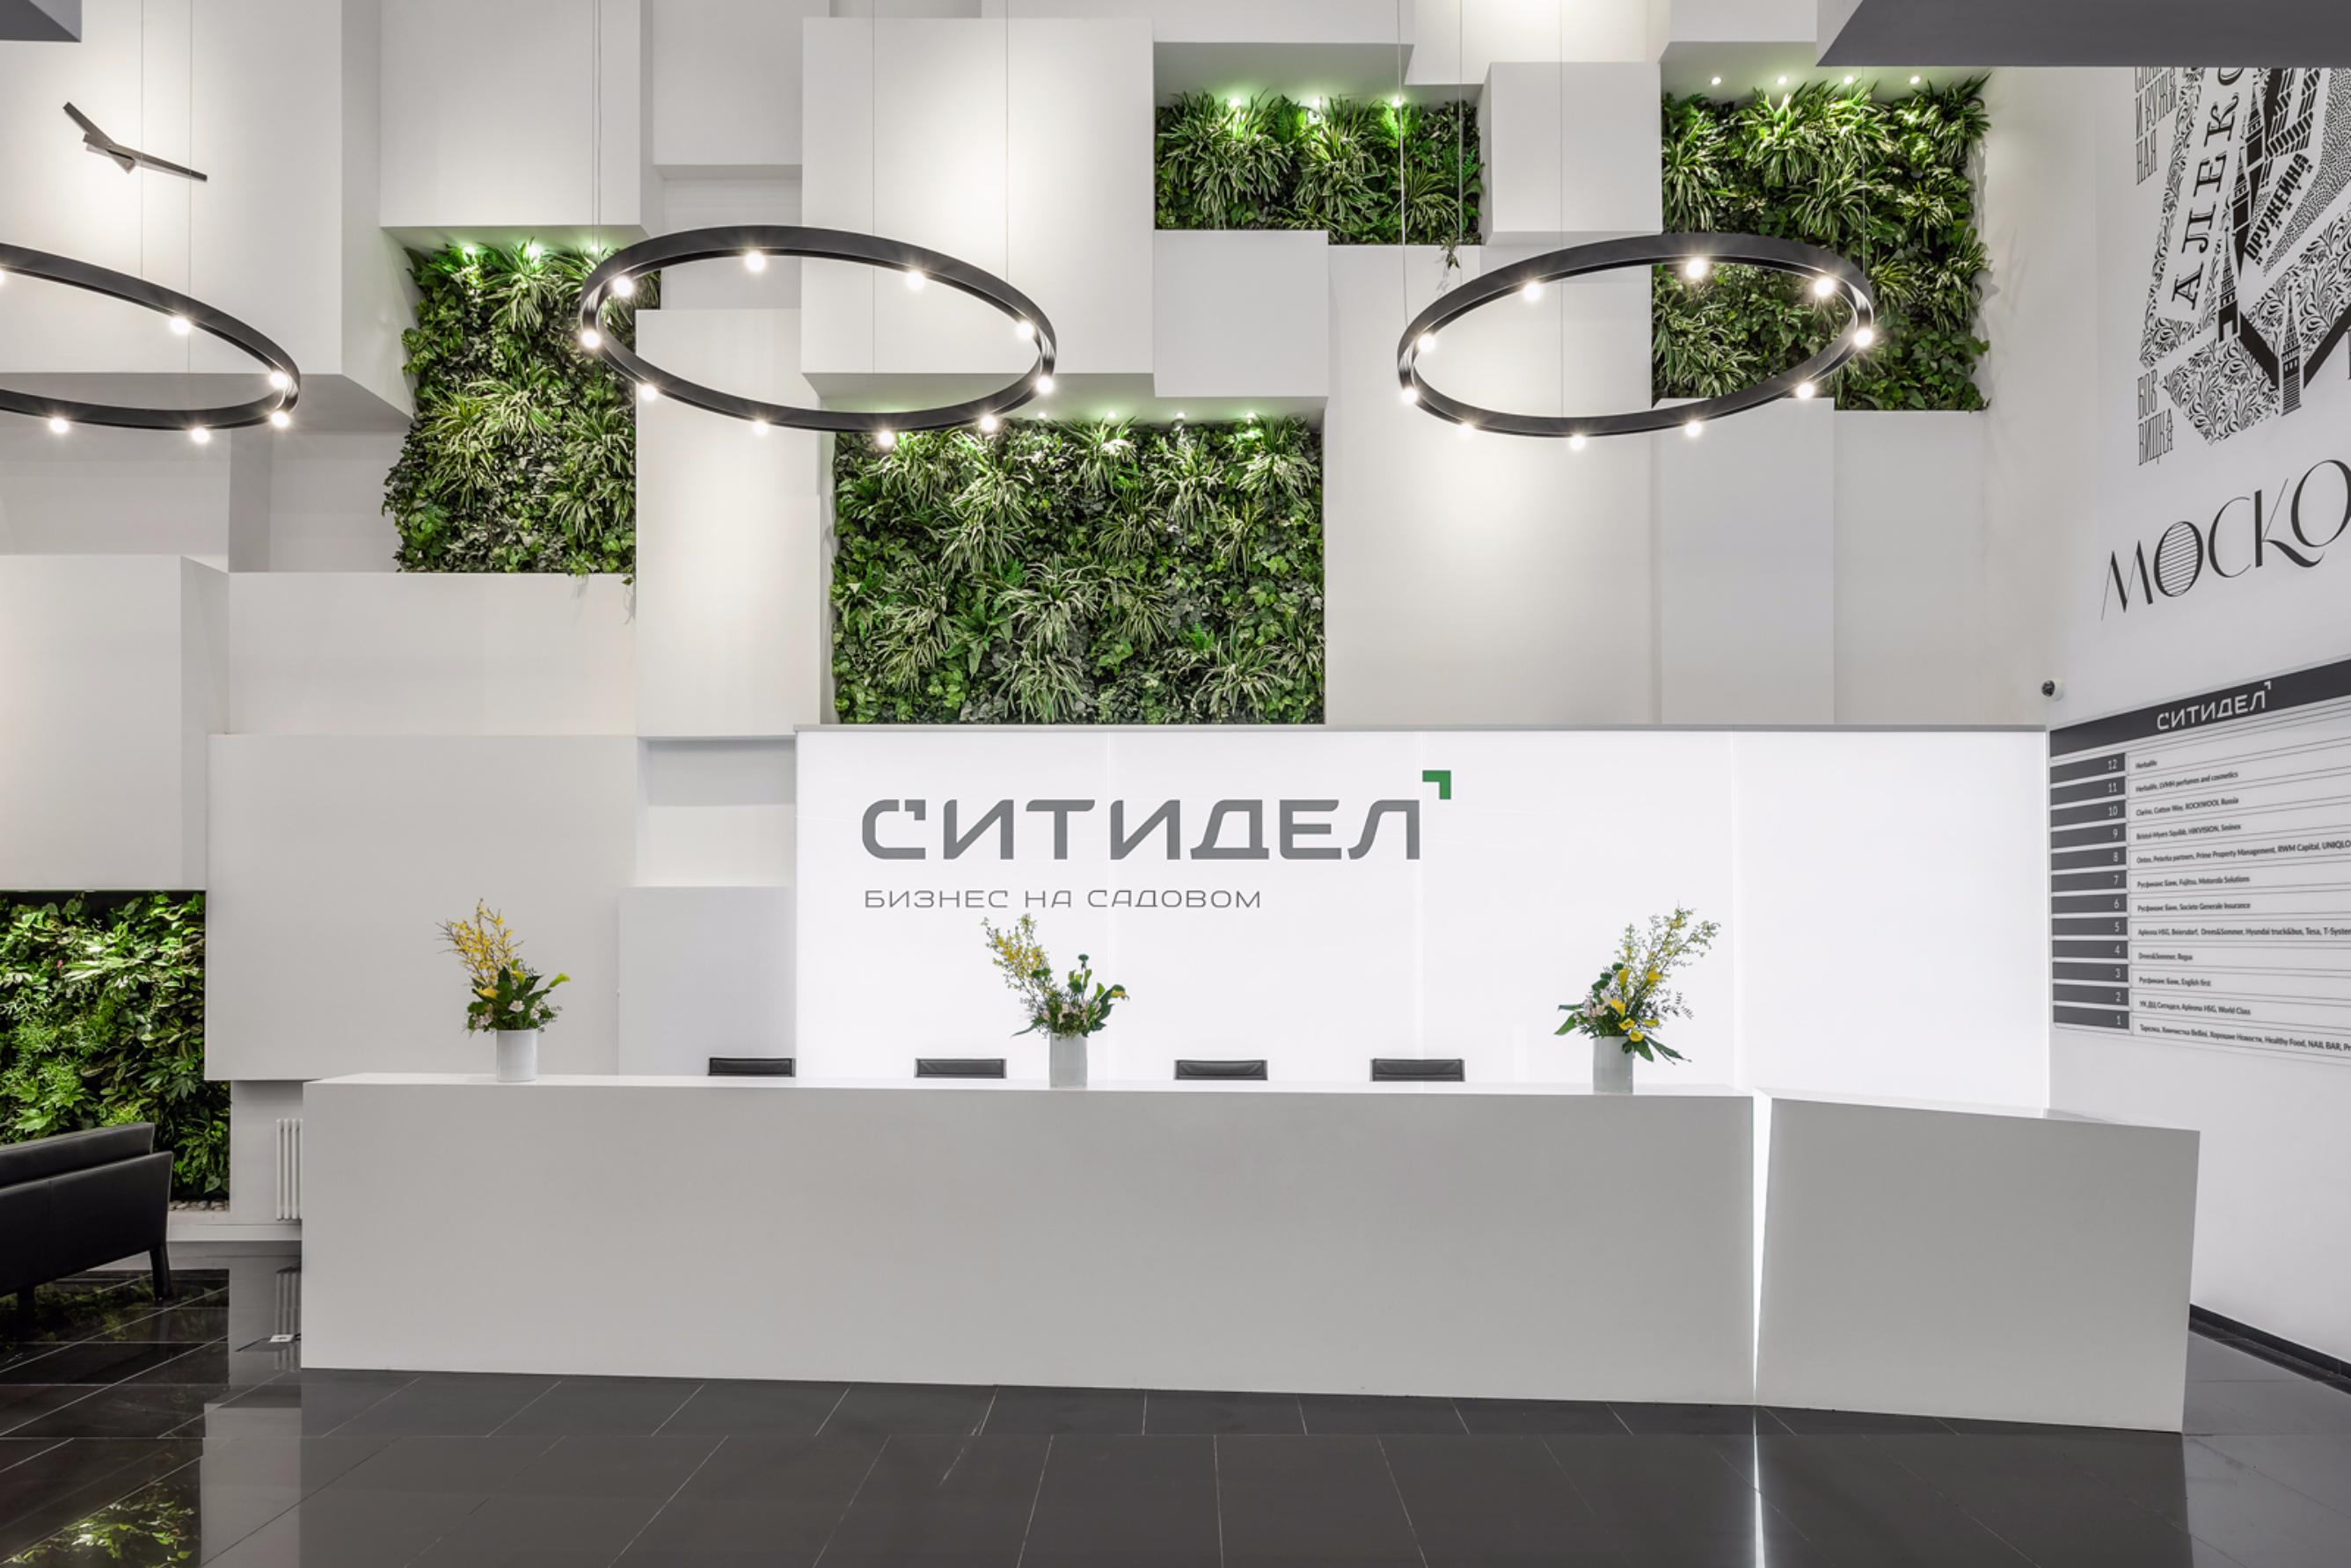 “Citydel” business center is nominated for “Best Office Awards 2018”